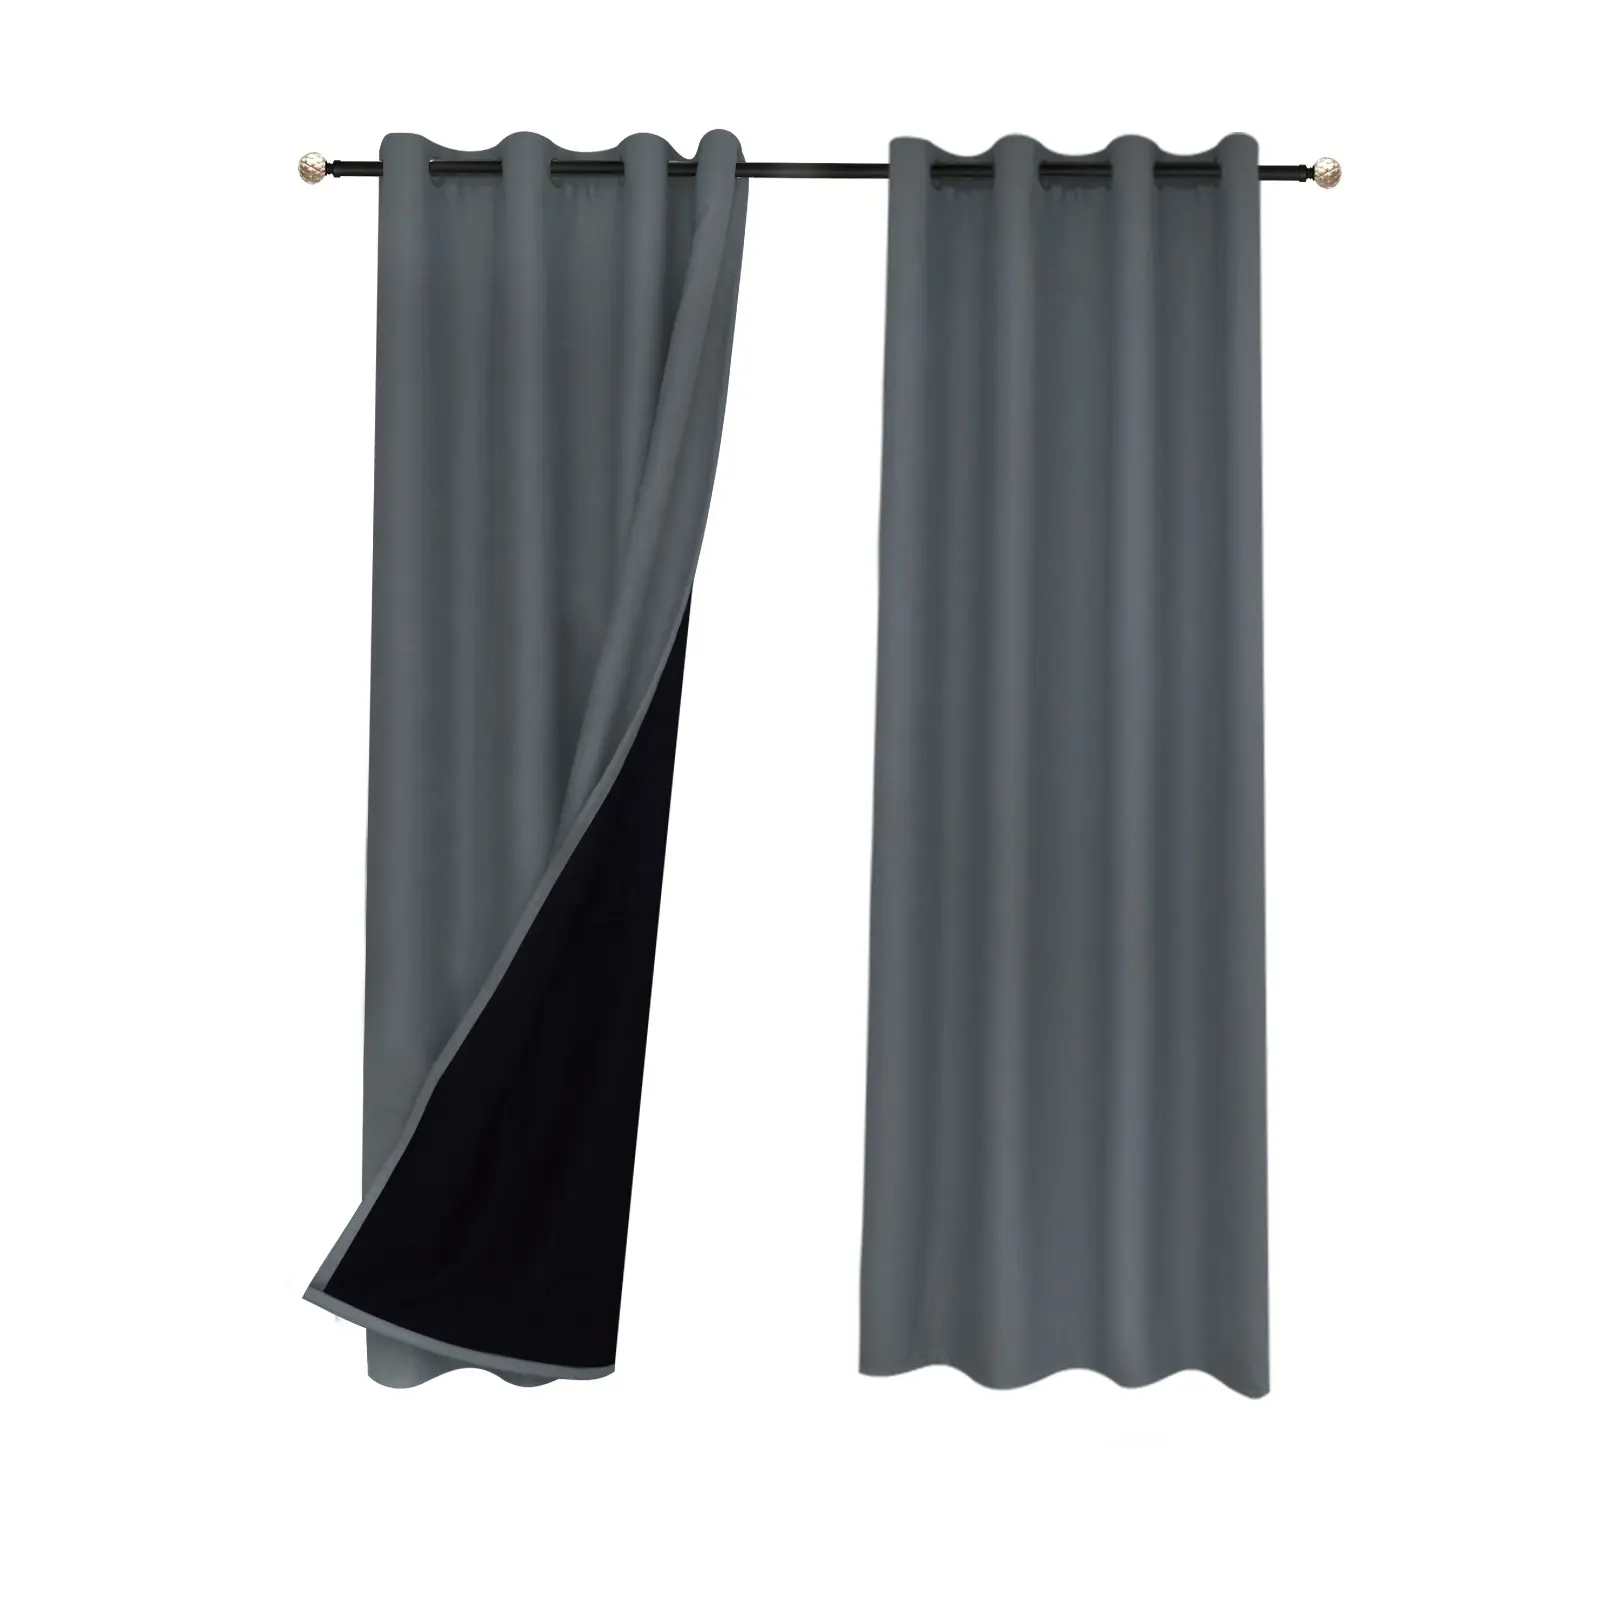 Accept OEM&ODM Luxury Bedroom Drapes Window Curtain Wholesale 100% Polyester 100% Blackout Curtain For The Living Room